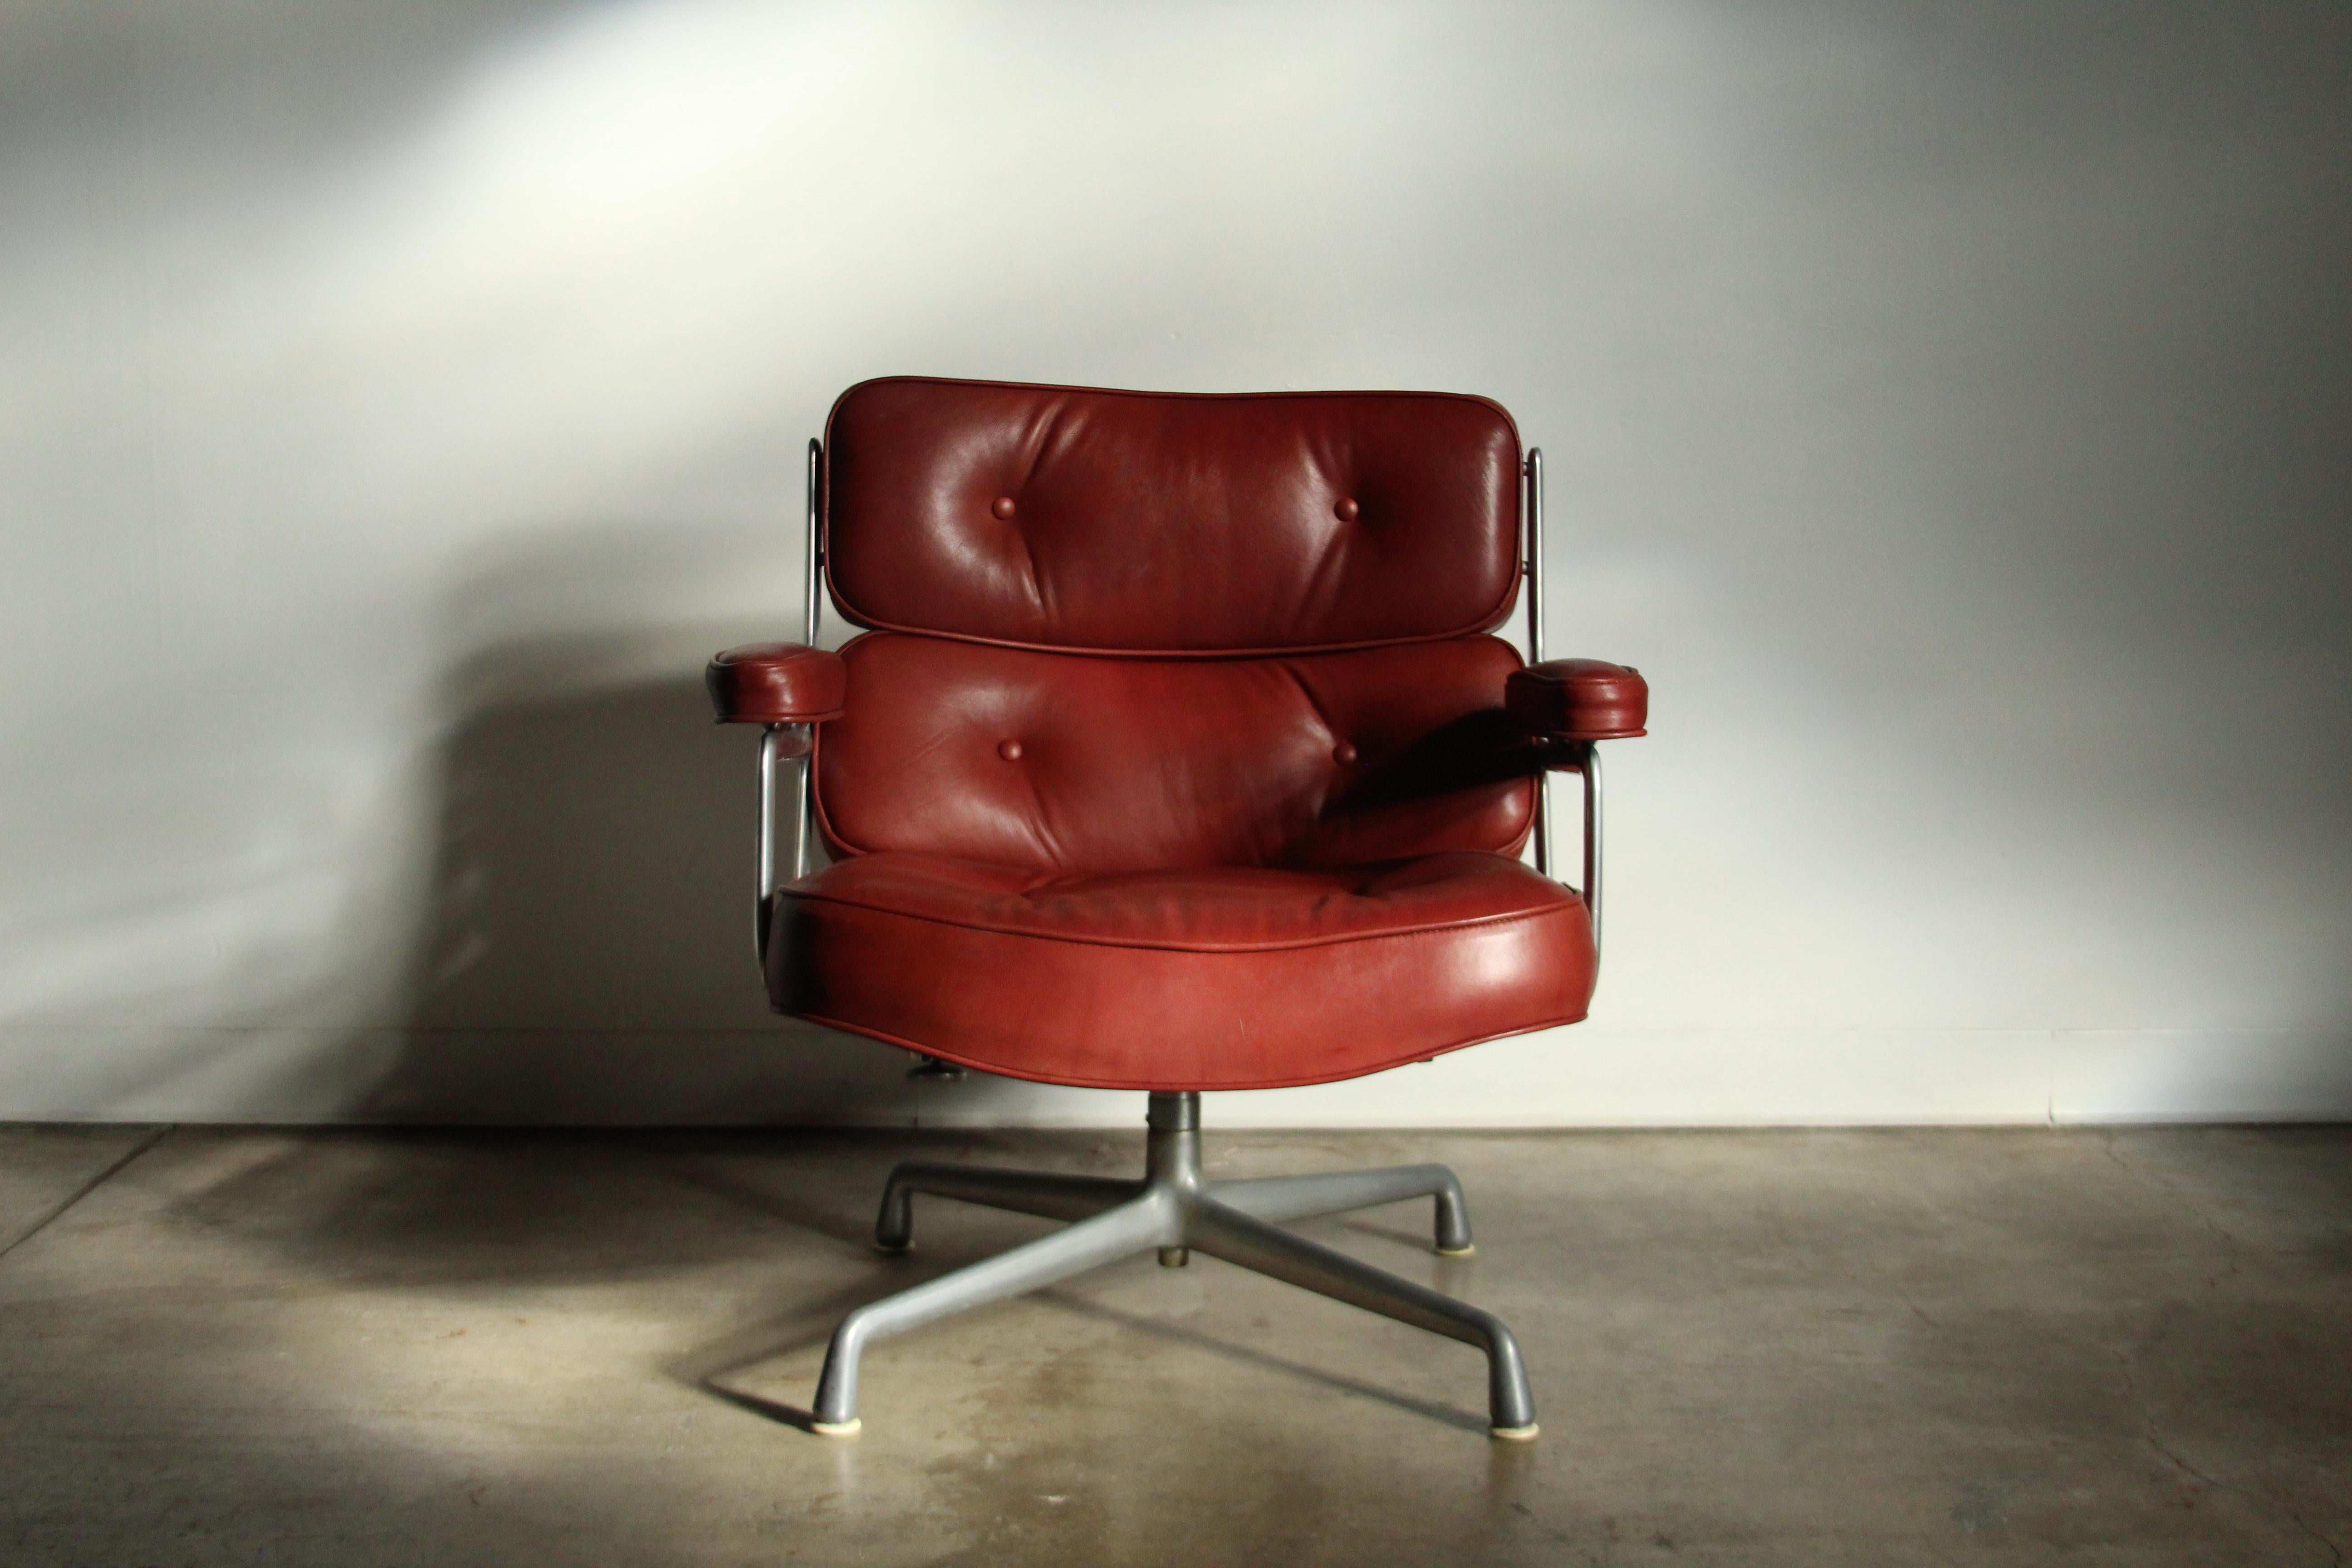 You won't find a nicer example of the Eames 